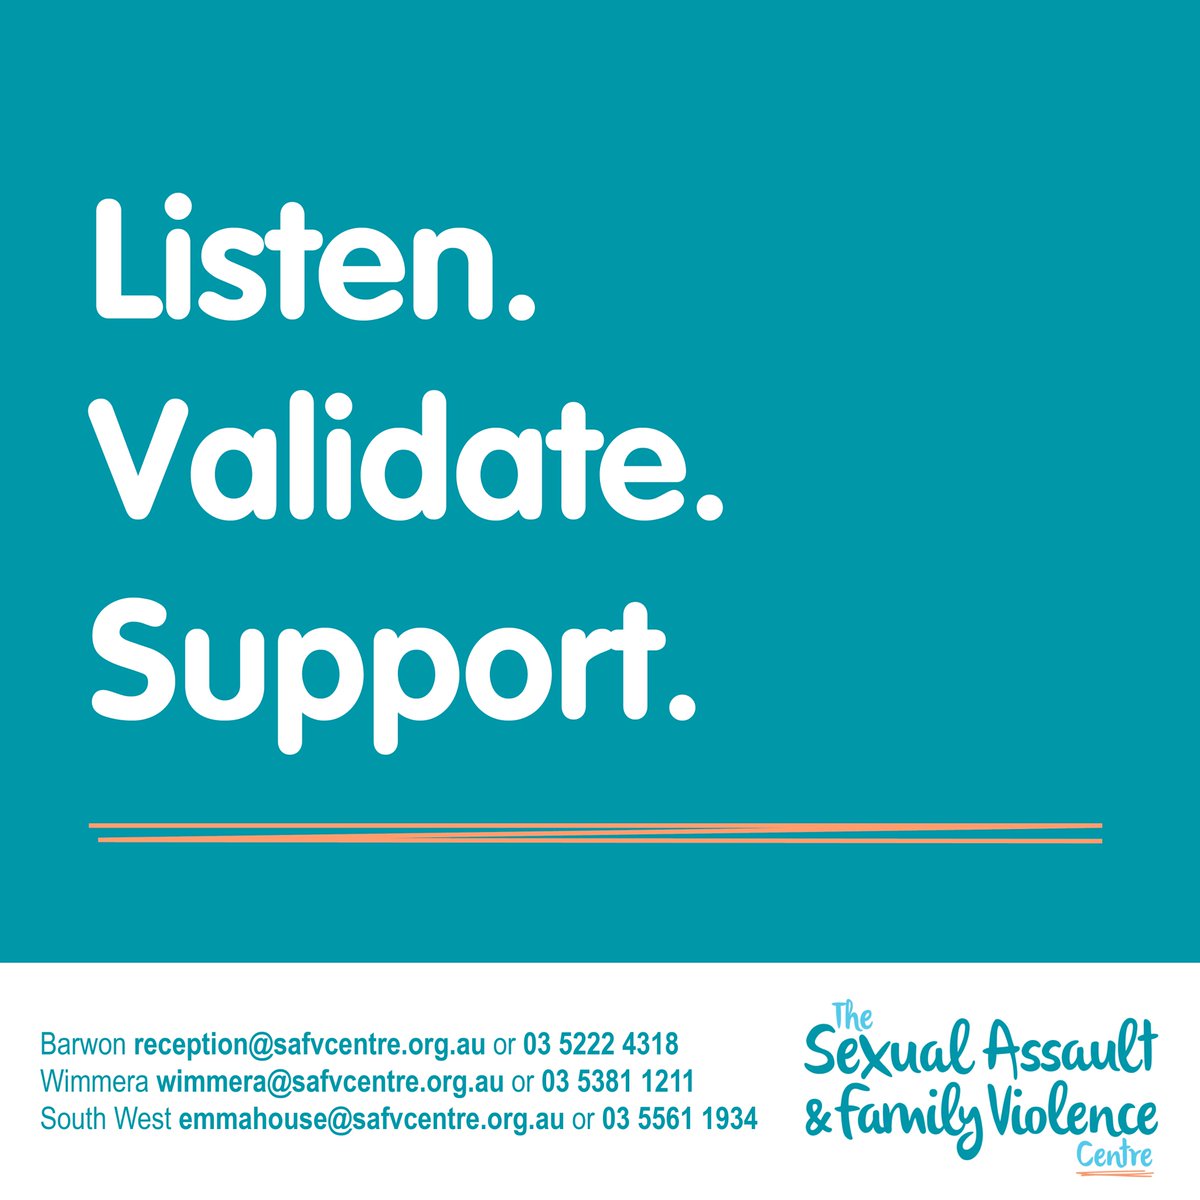 It takes courage for someone to disclose sexual assault. How you respond can make a big difference. Sometimes words aren't needed and simply listening without judgement can be the biggest support.